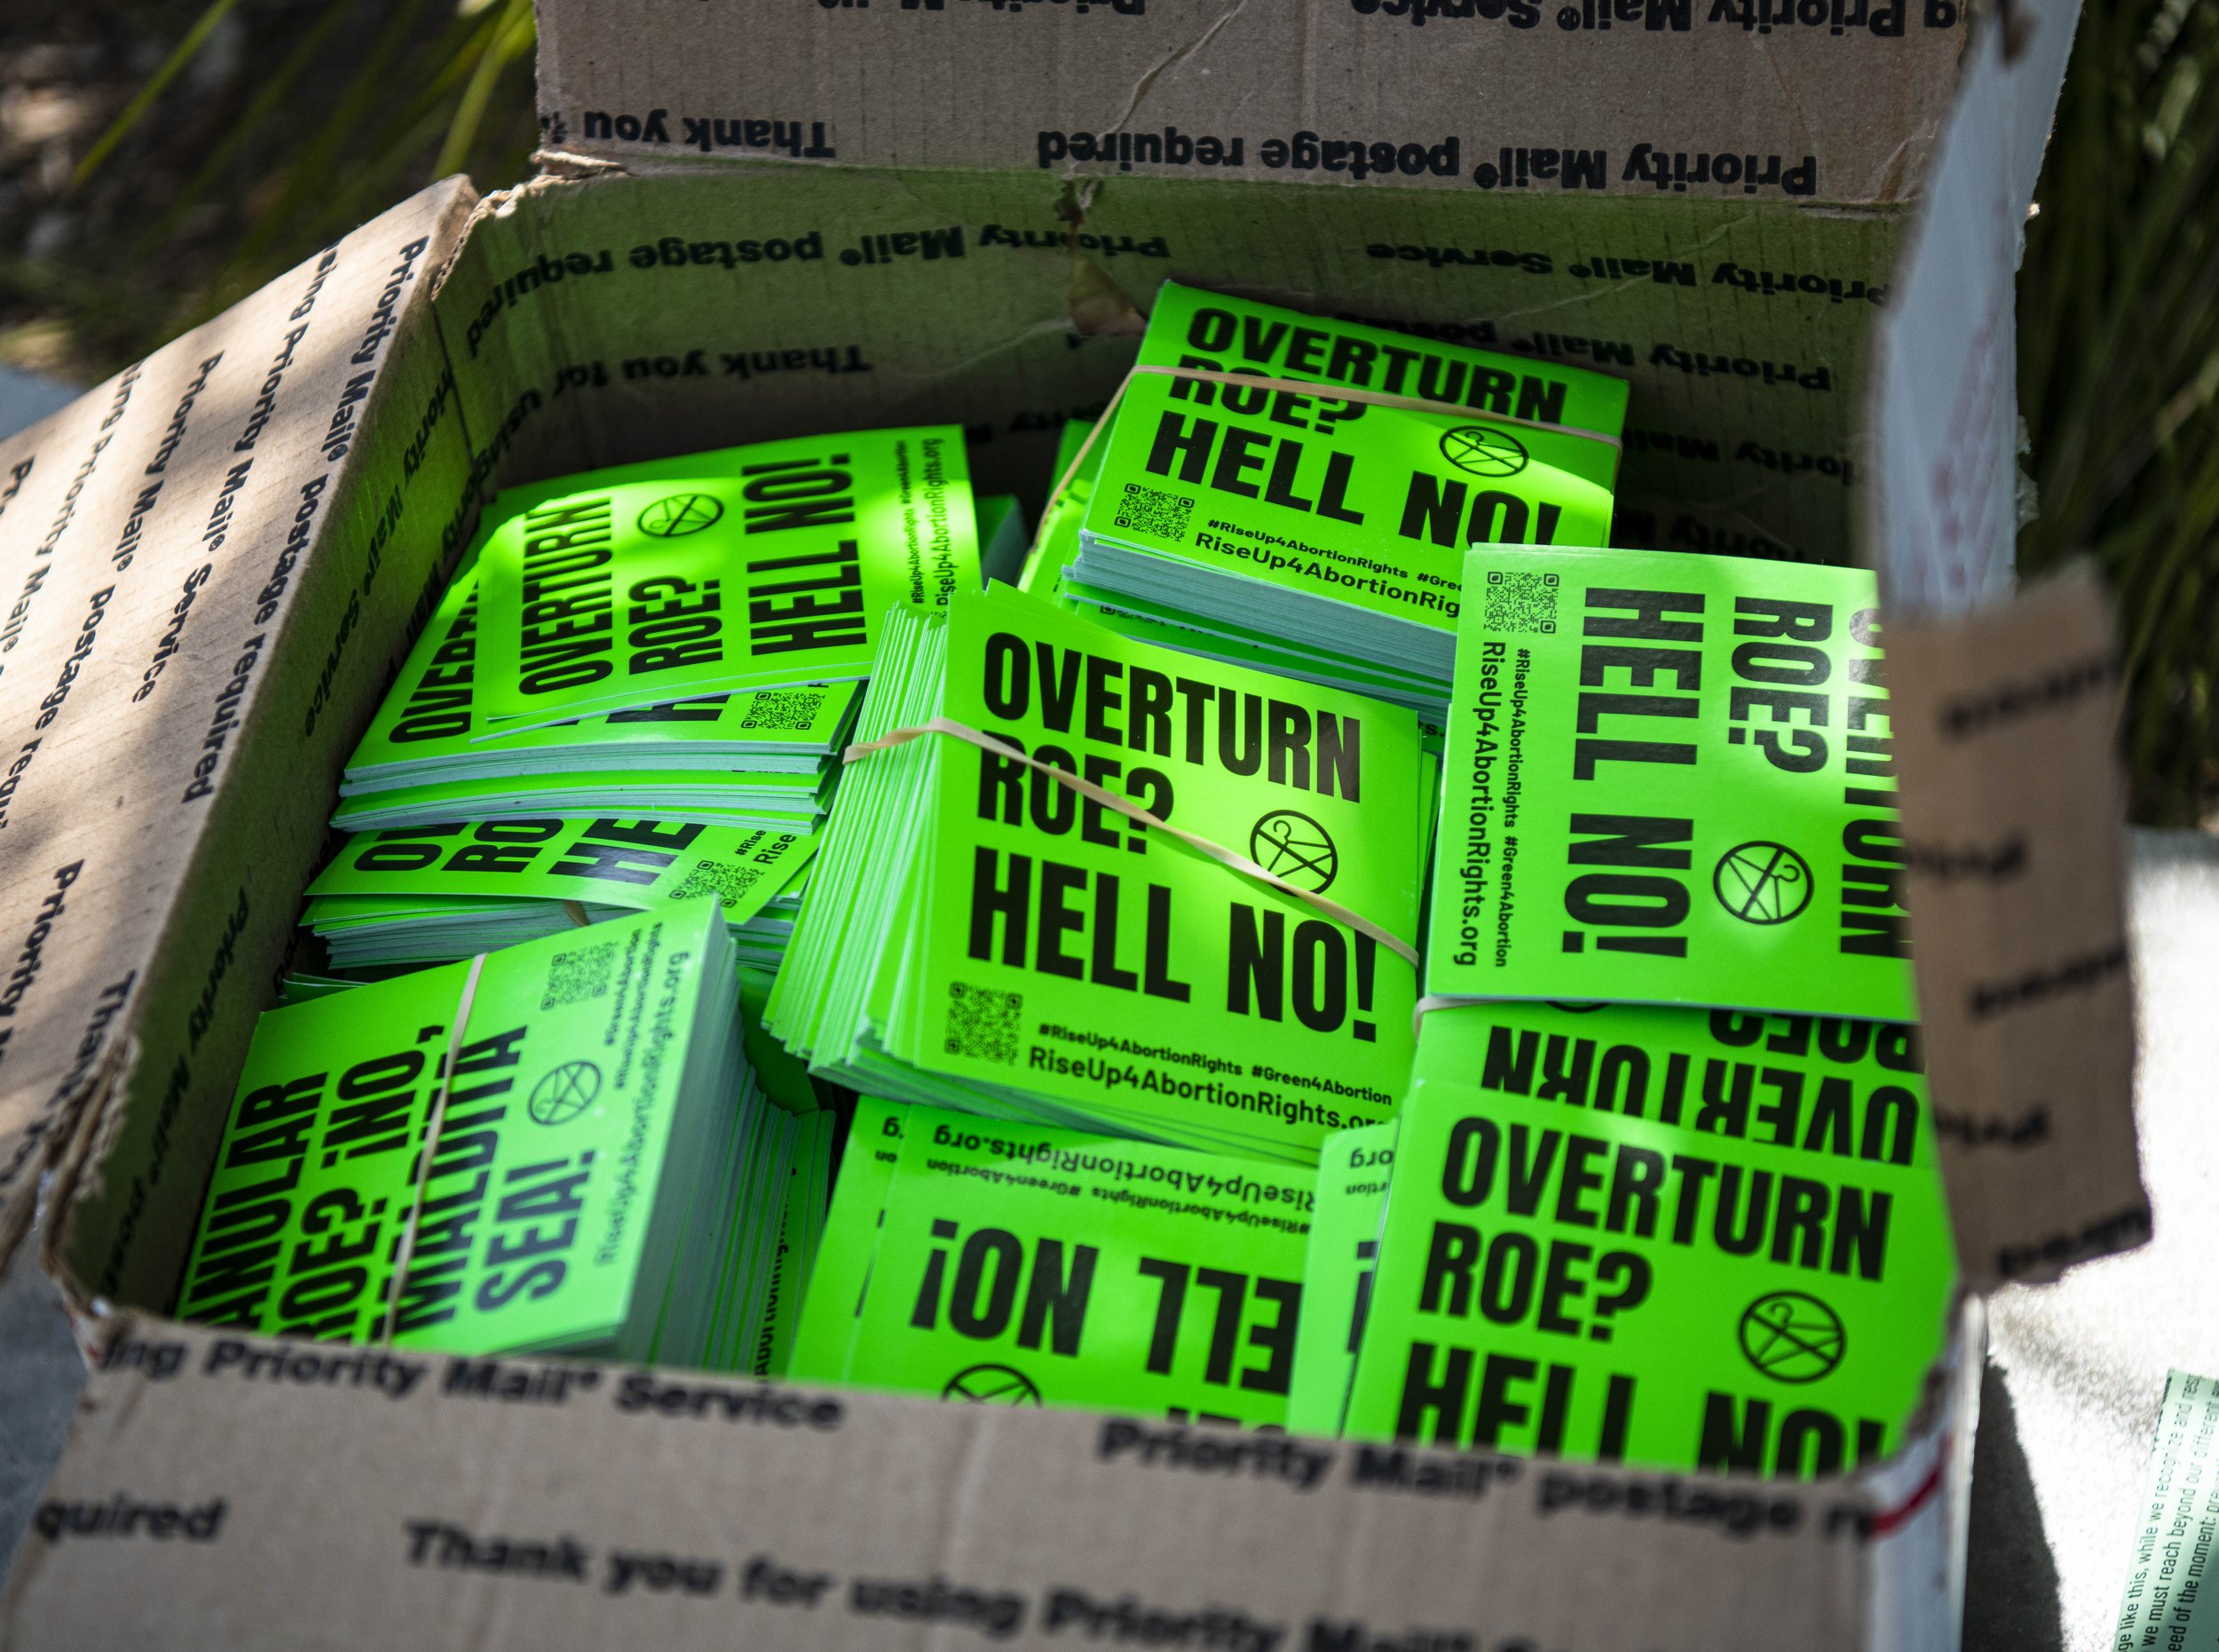  A box of "Overturn Roe Hell No" stickers ready to be disperssed among the crowds at Dodger Stadium for Rise Up 4 Abortion Rights planned peaceful protest on Sunday, June 5. (Jon Putman | The Corsair) 